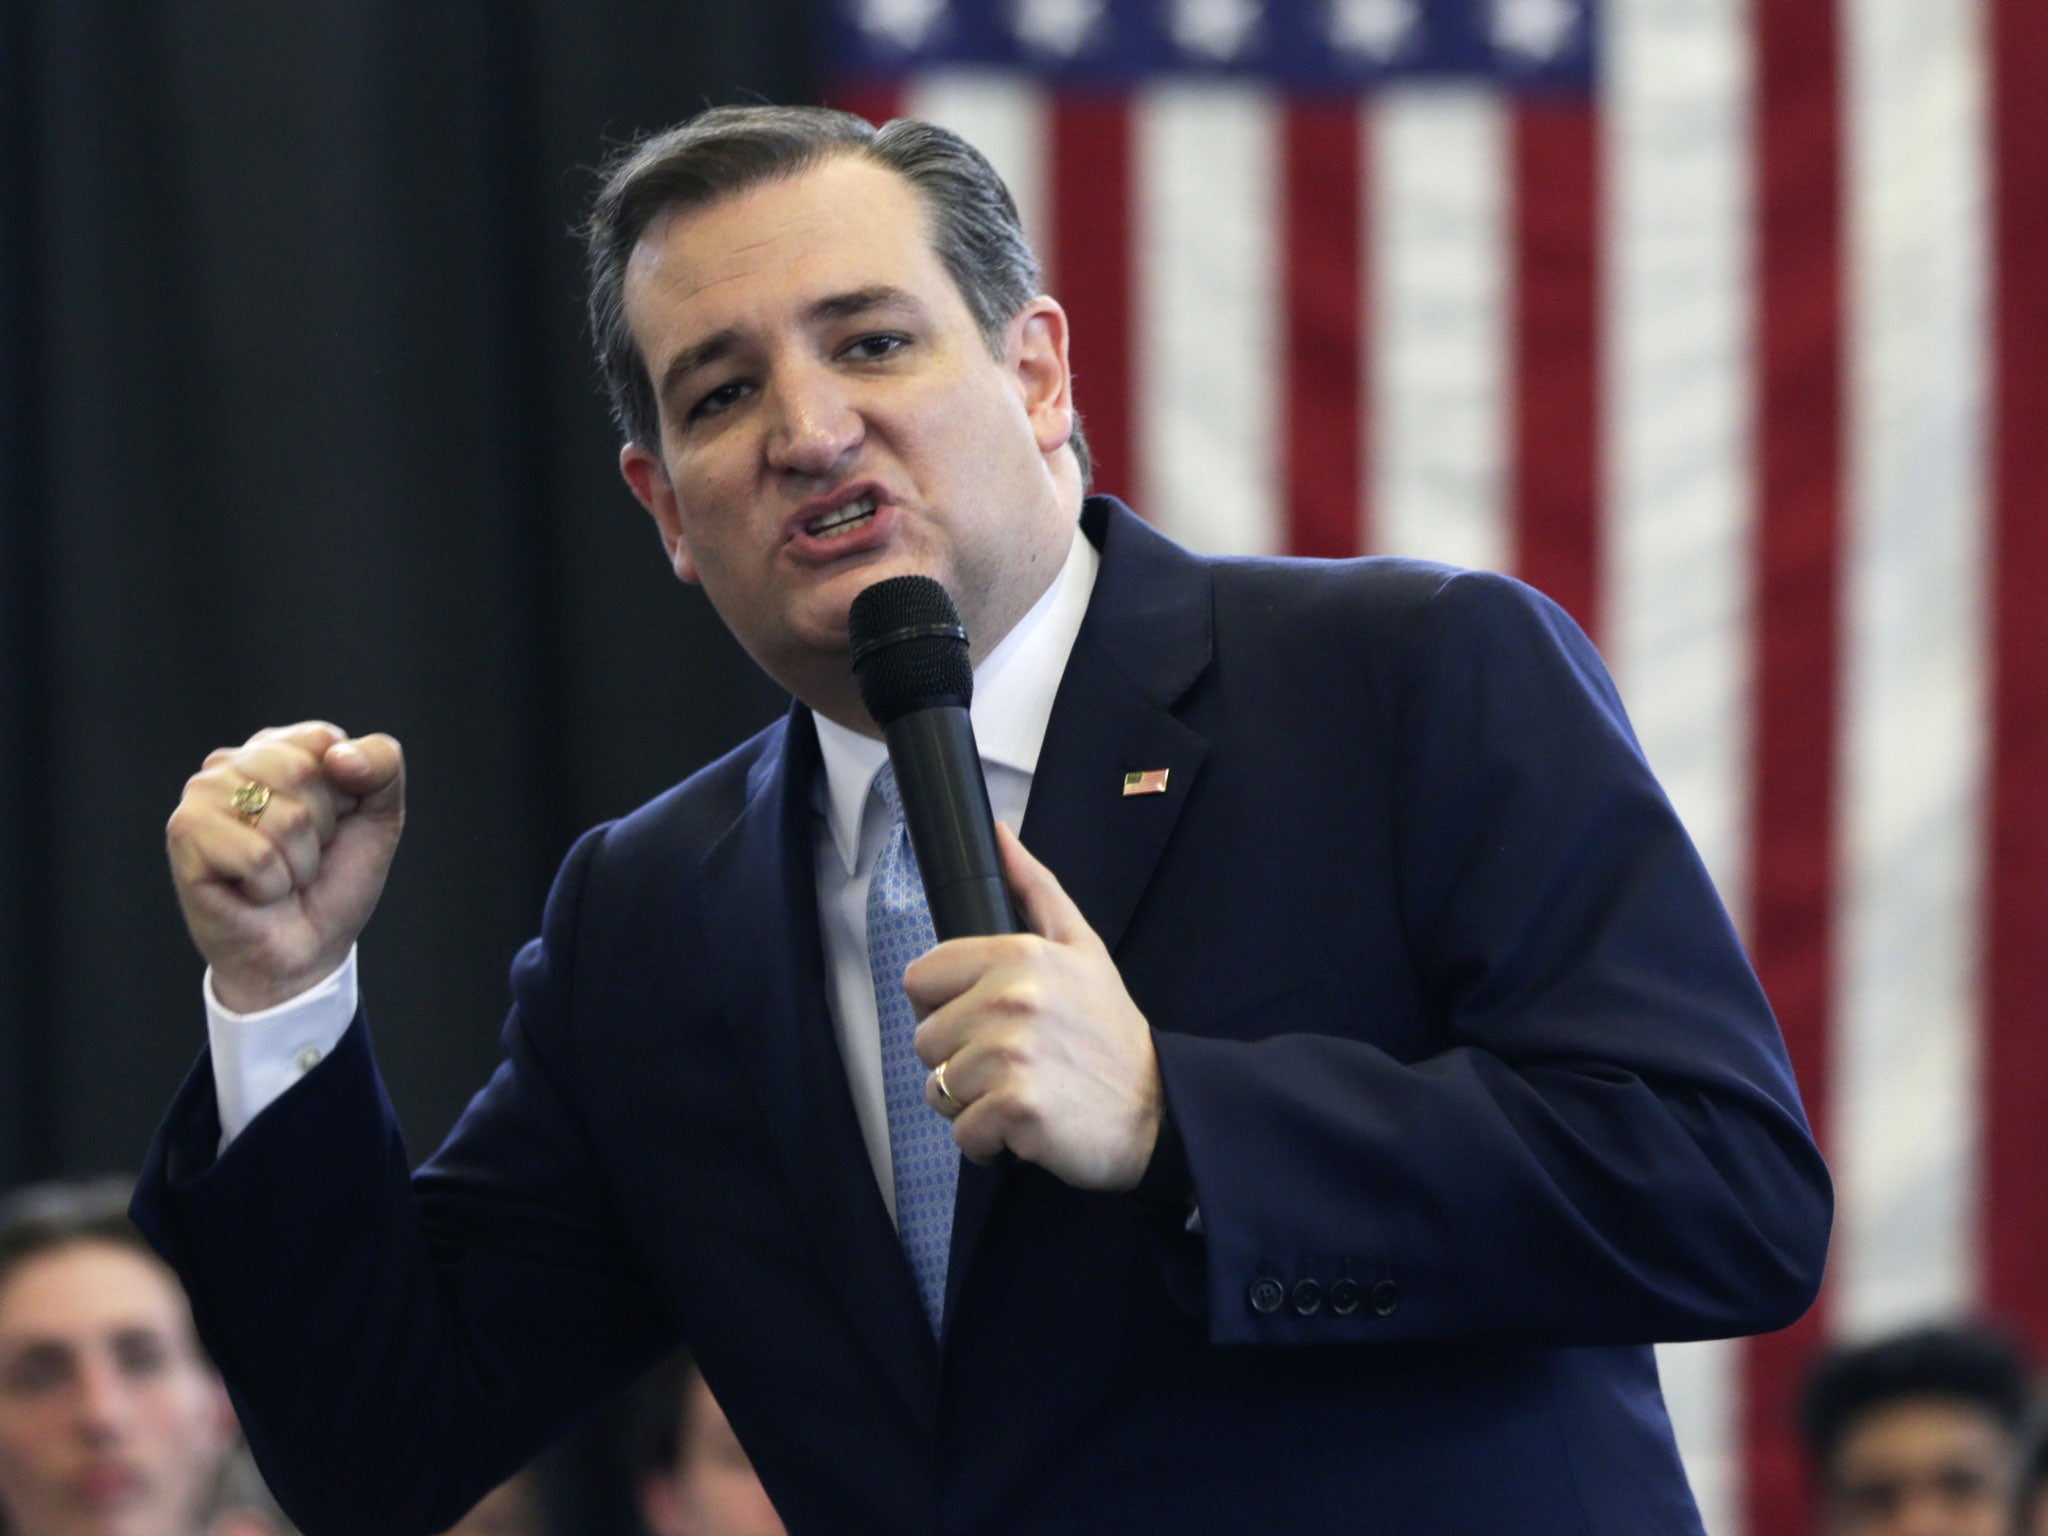 Ted Cruz looks to Indiana to regain credibility after Tuesday losses